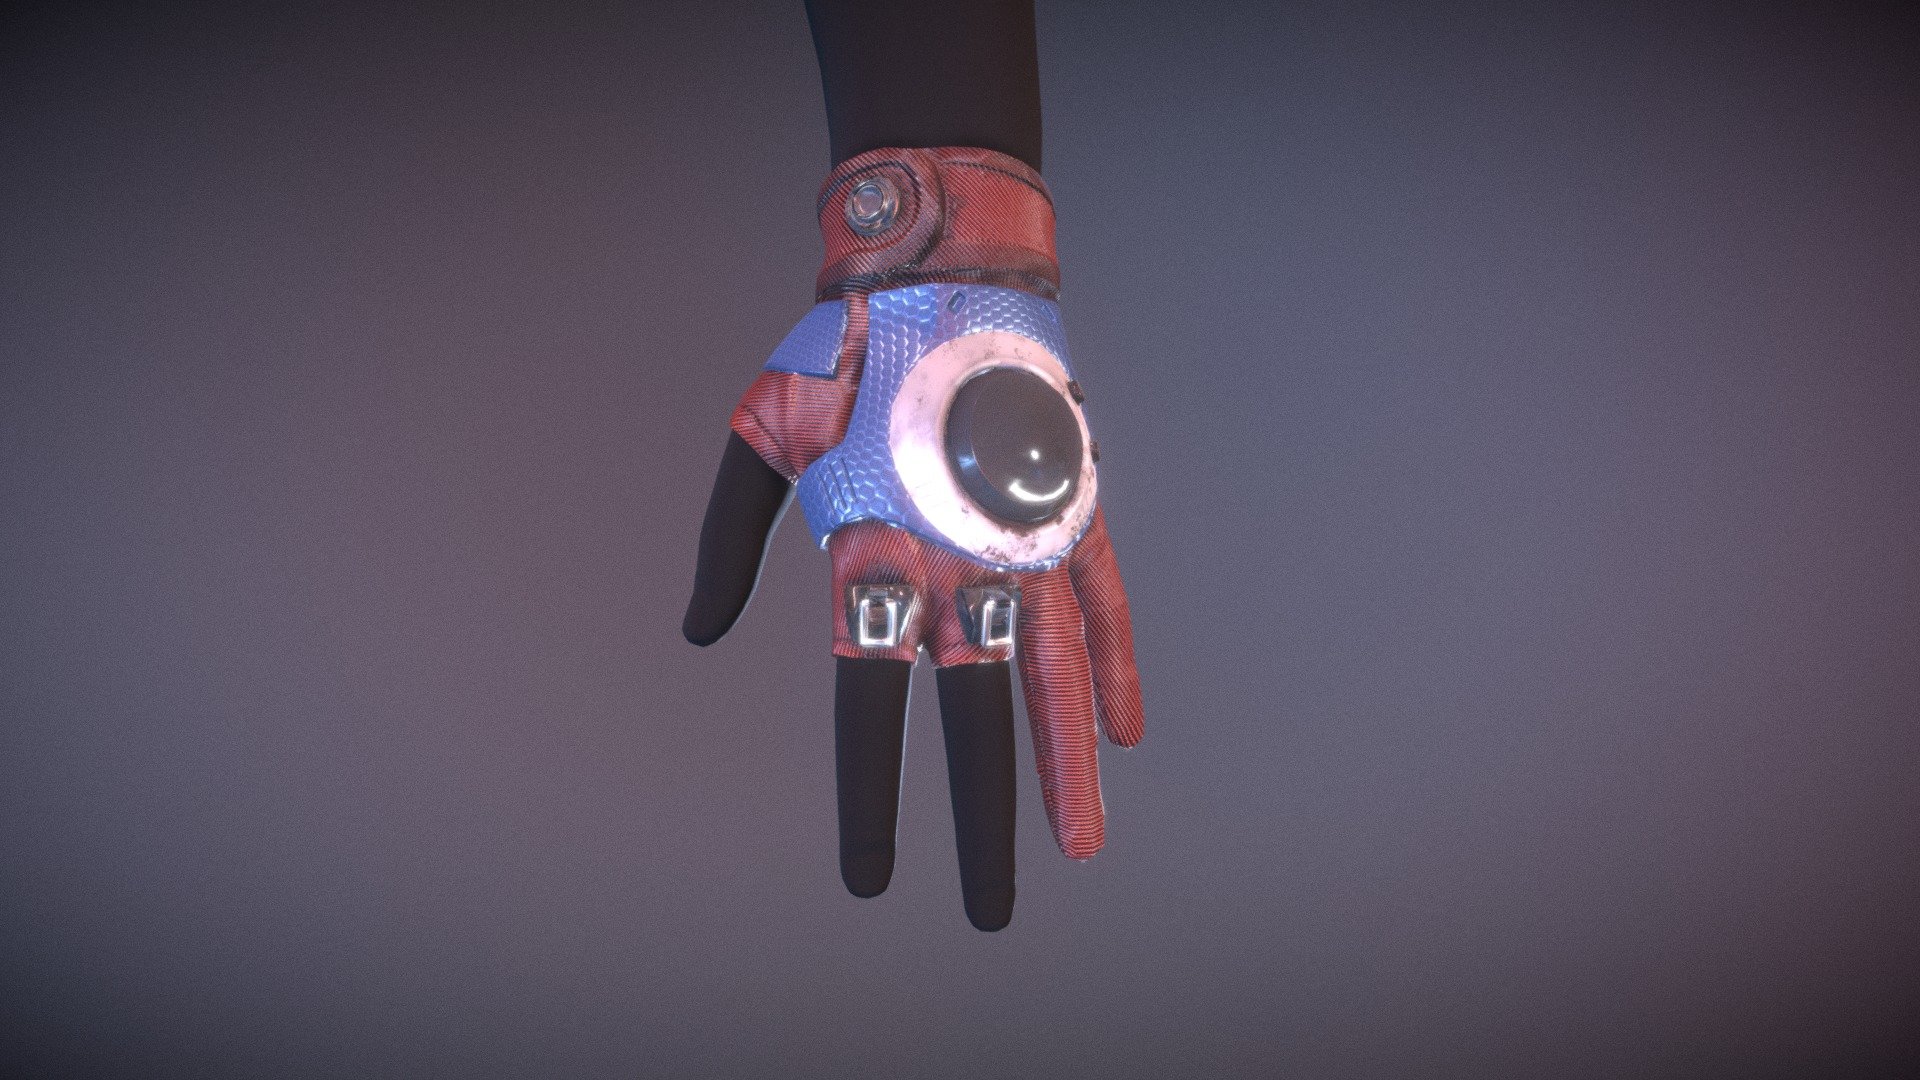 I designed, sculpted, retopologized and textured this glove to reflex the essence of my personality, in order to proceed with my Animation Portfolio. Clearly, I could have picked up any FPS arms available on the modding sites but I decided to do something &lsquo;me' this time. As you can guess the influences that I took for this piece, they are Spider-Man (obviously haha), Titanfall 2, drawing glove and Dirty Bomb. It's not the best but surely I did learn quite a lot from this mini project! - FPS Arm - 3D model by vinchau (@vinnish) 3d model